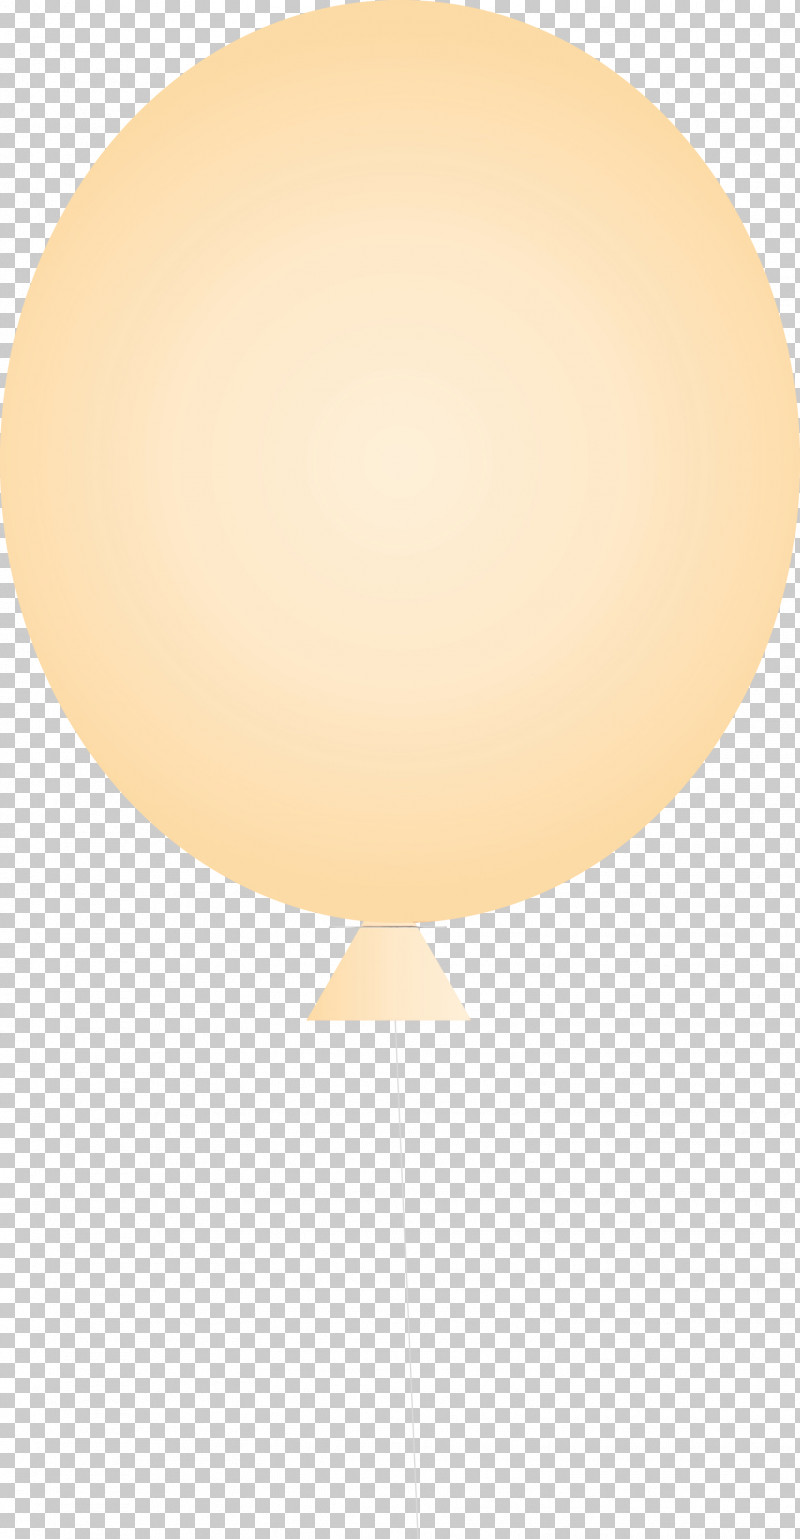 Lighting Accessory Ceiling Fixture Yellow Balloon Lamp PNG, Clipart, Balloon, Ceiling, Ceiling Fixture, Lamp, Lighting Free PNG Download